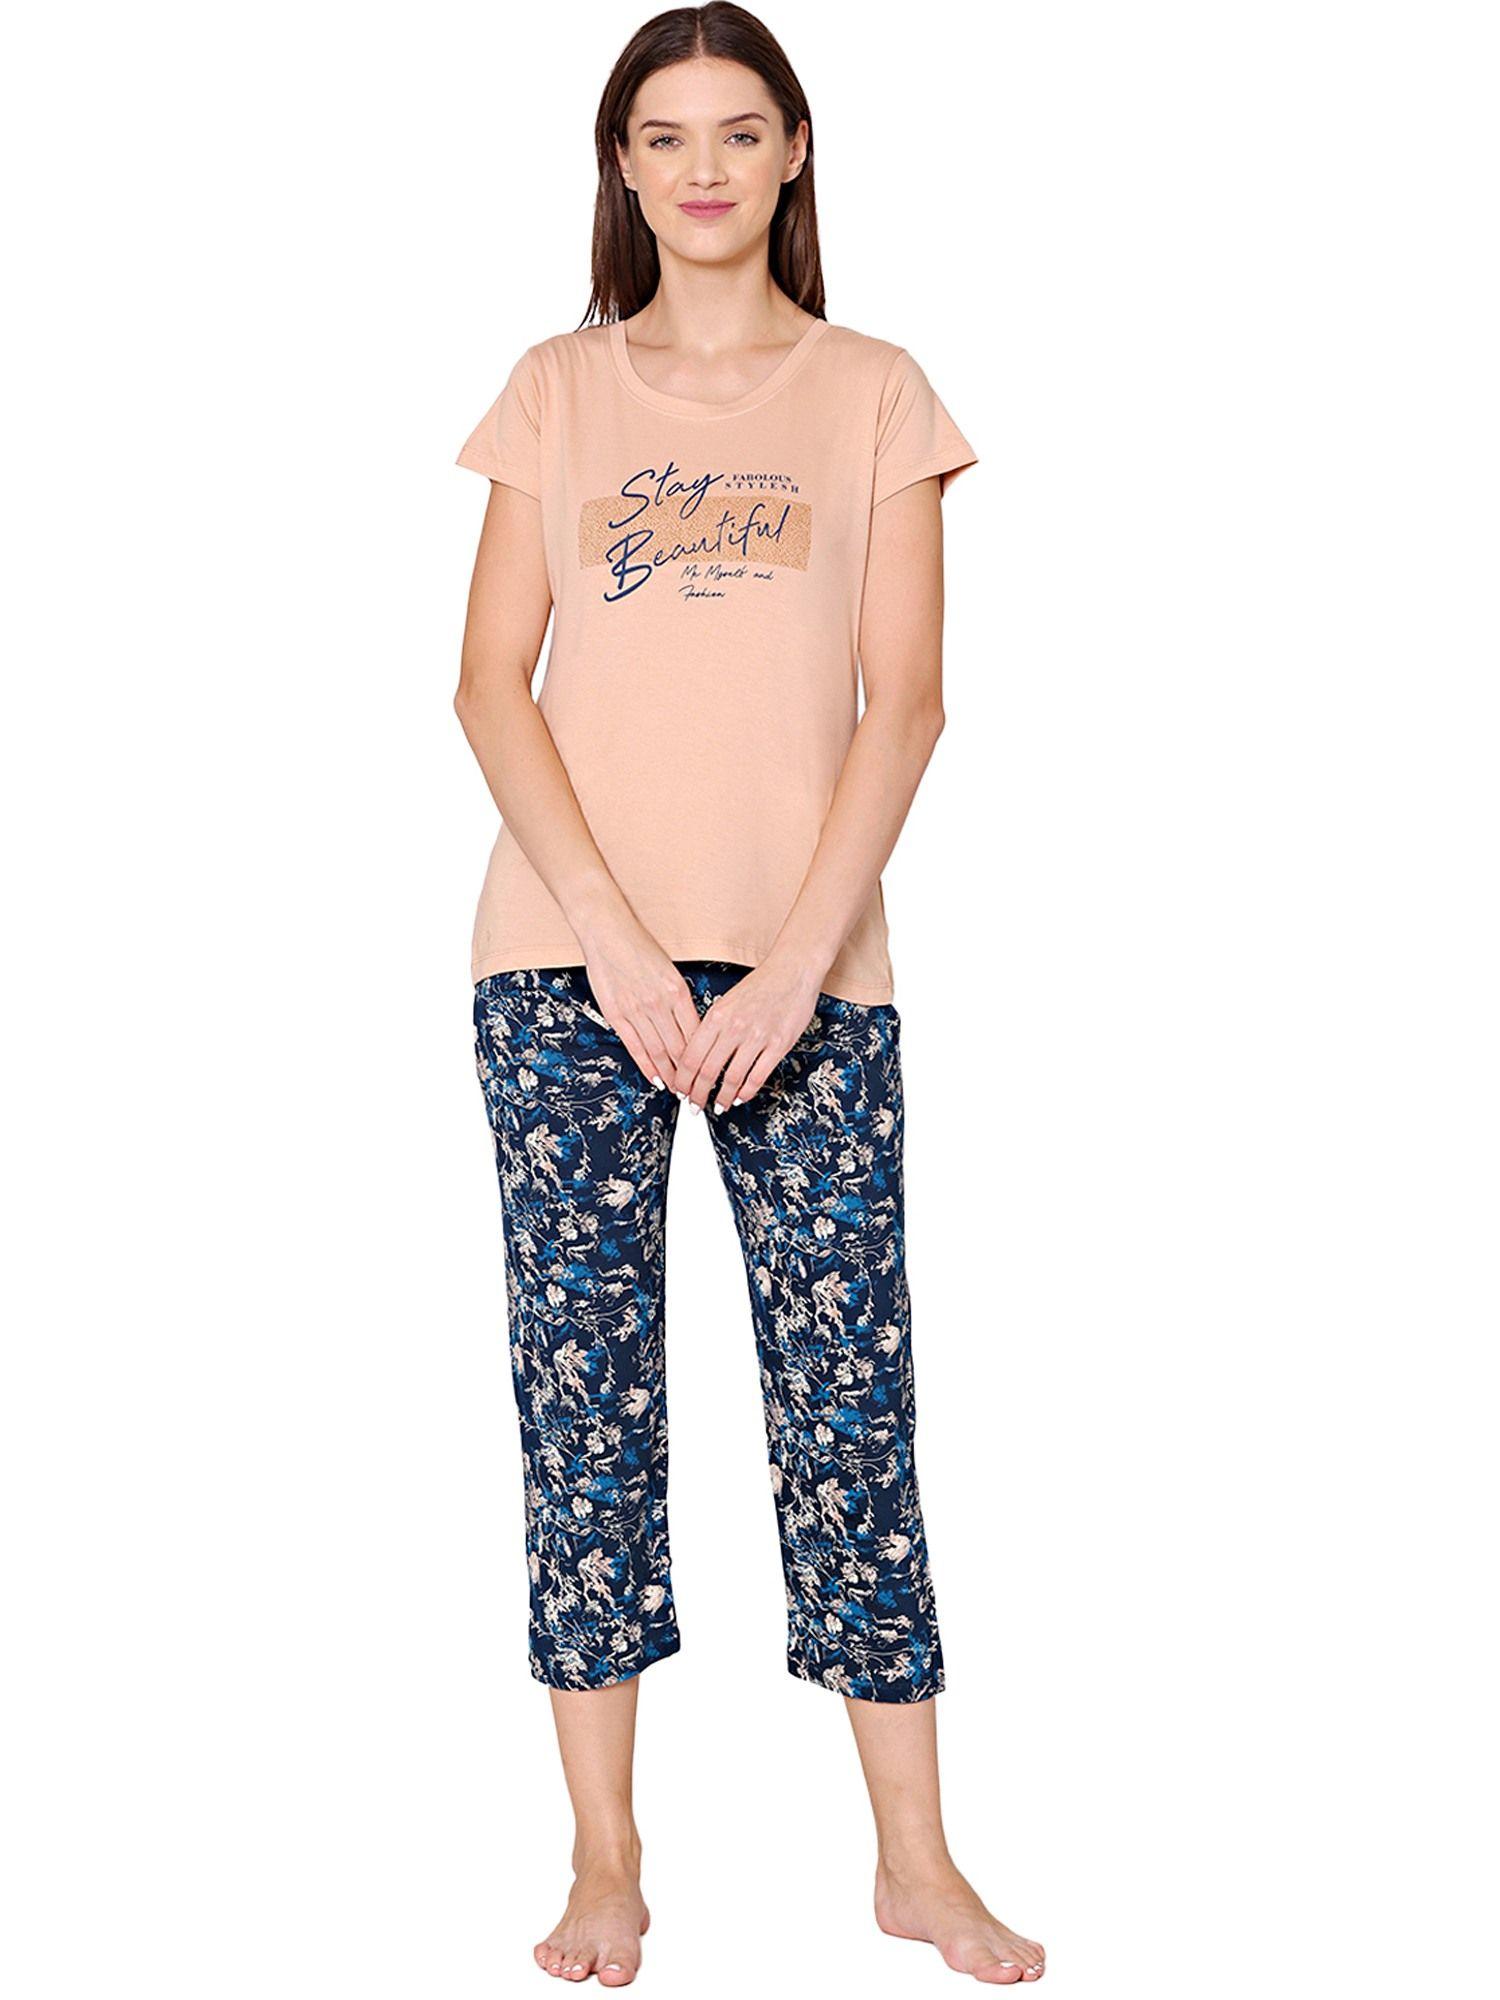 womens combed cotton printed t-shirt & capri -bscs16004 multi-color (set of 2)